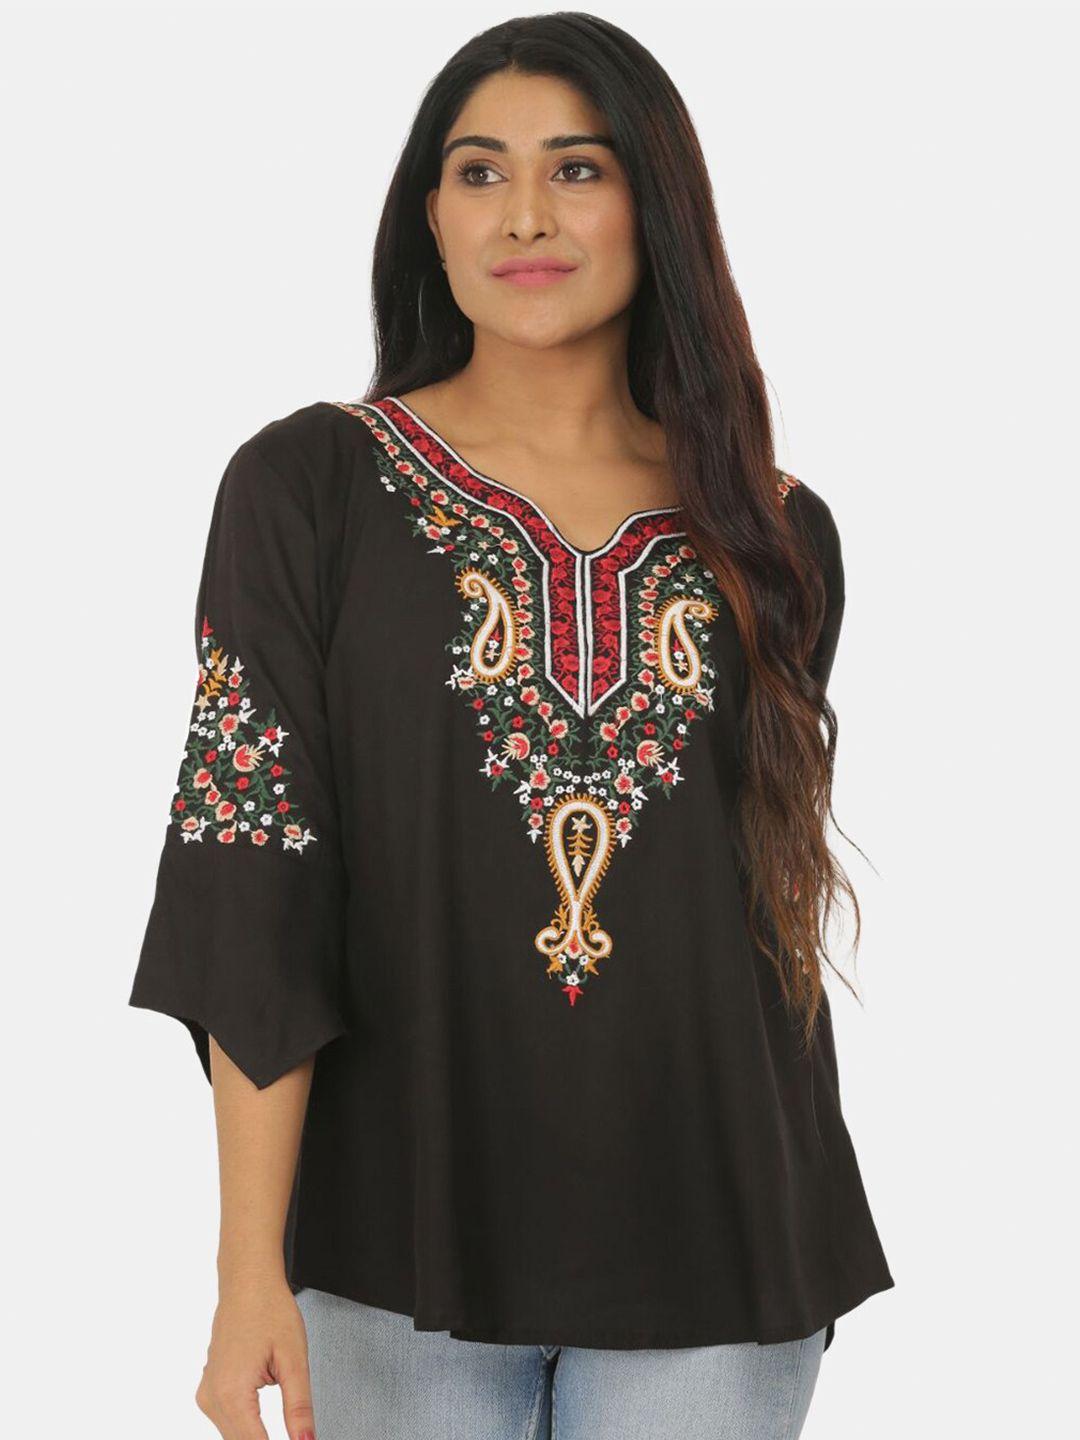 saakaa floral embroidered top